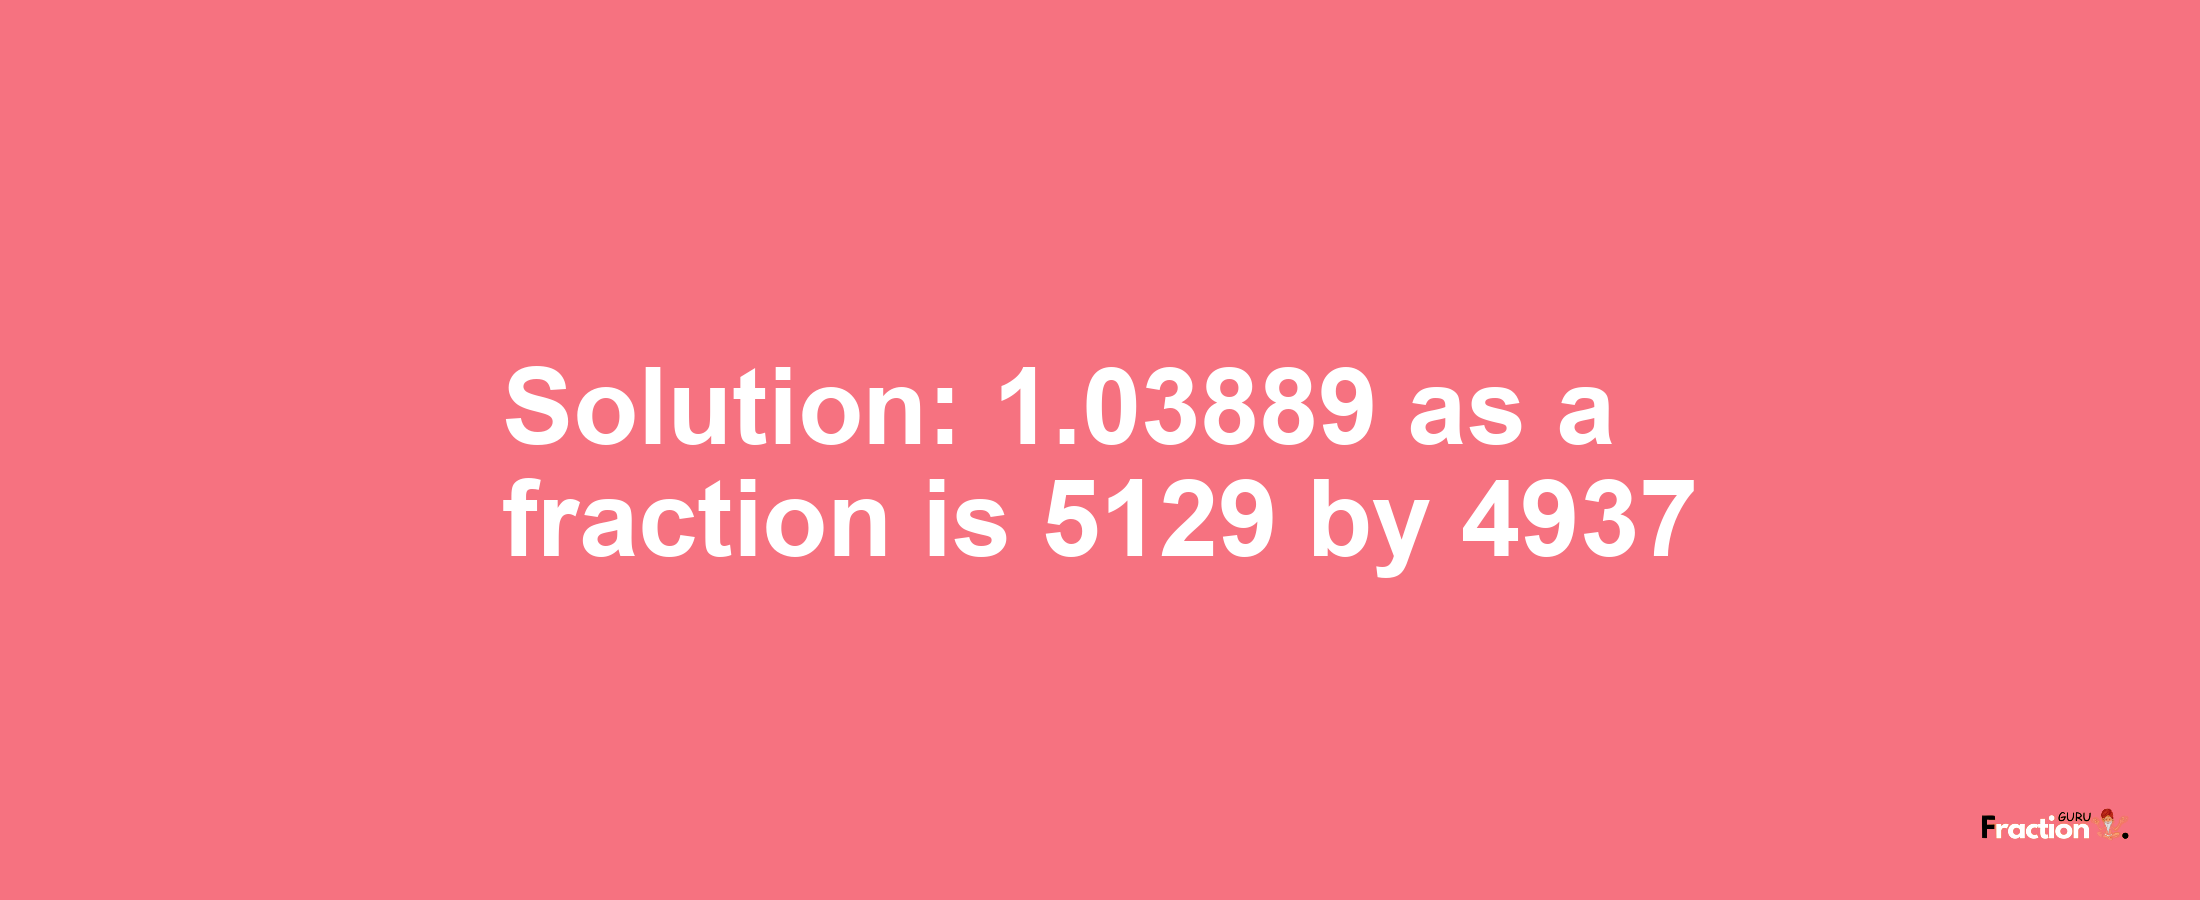 Solution:1.03889 as a fraction is 5129/4937